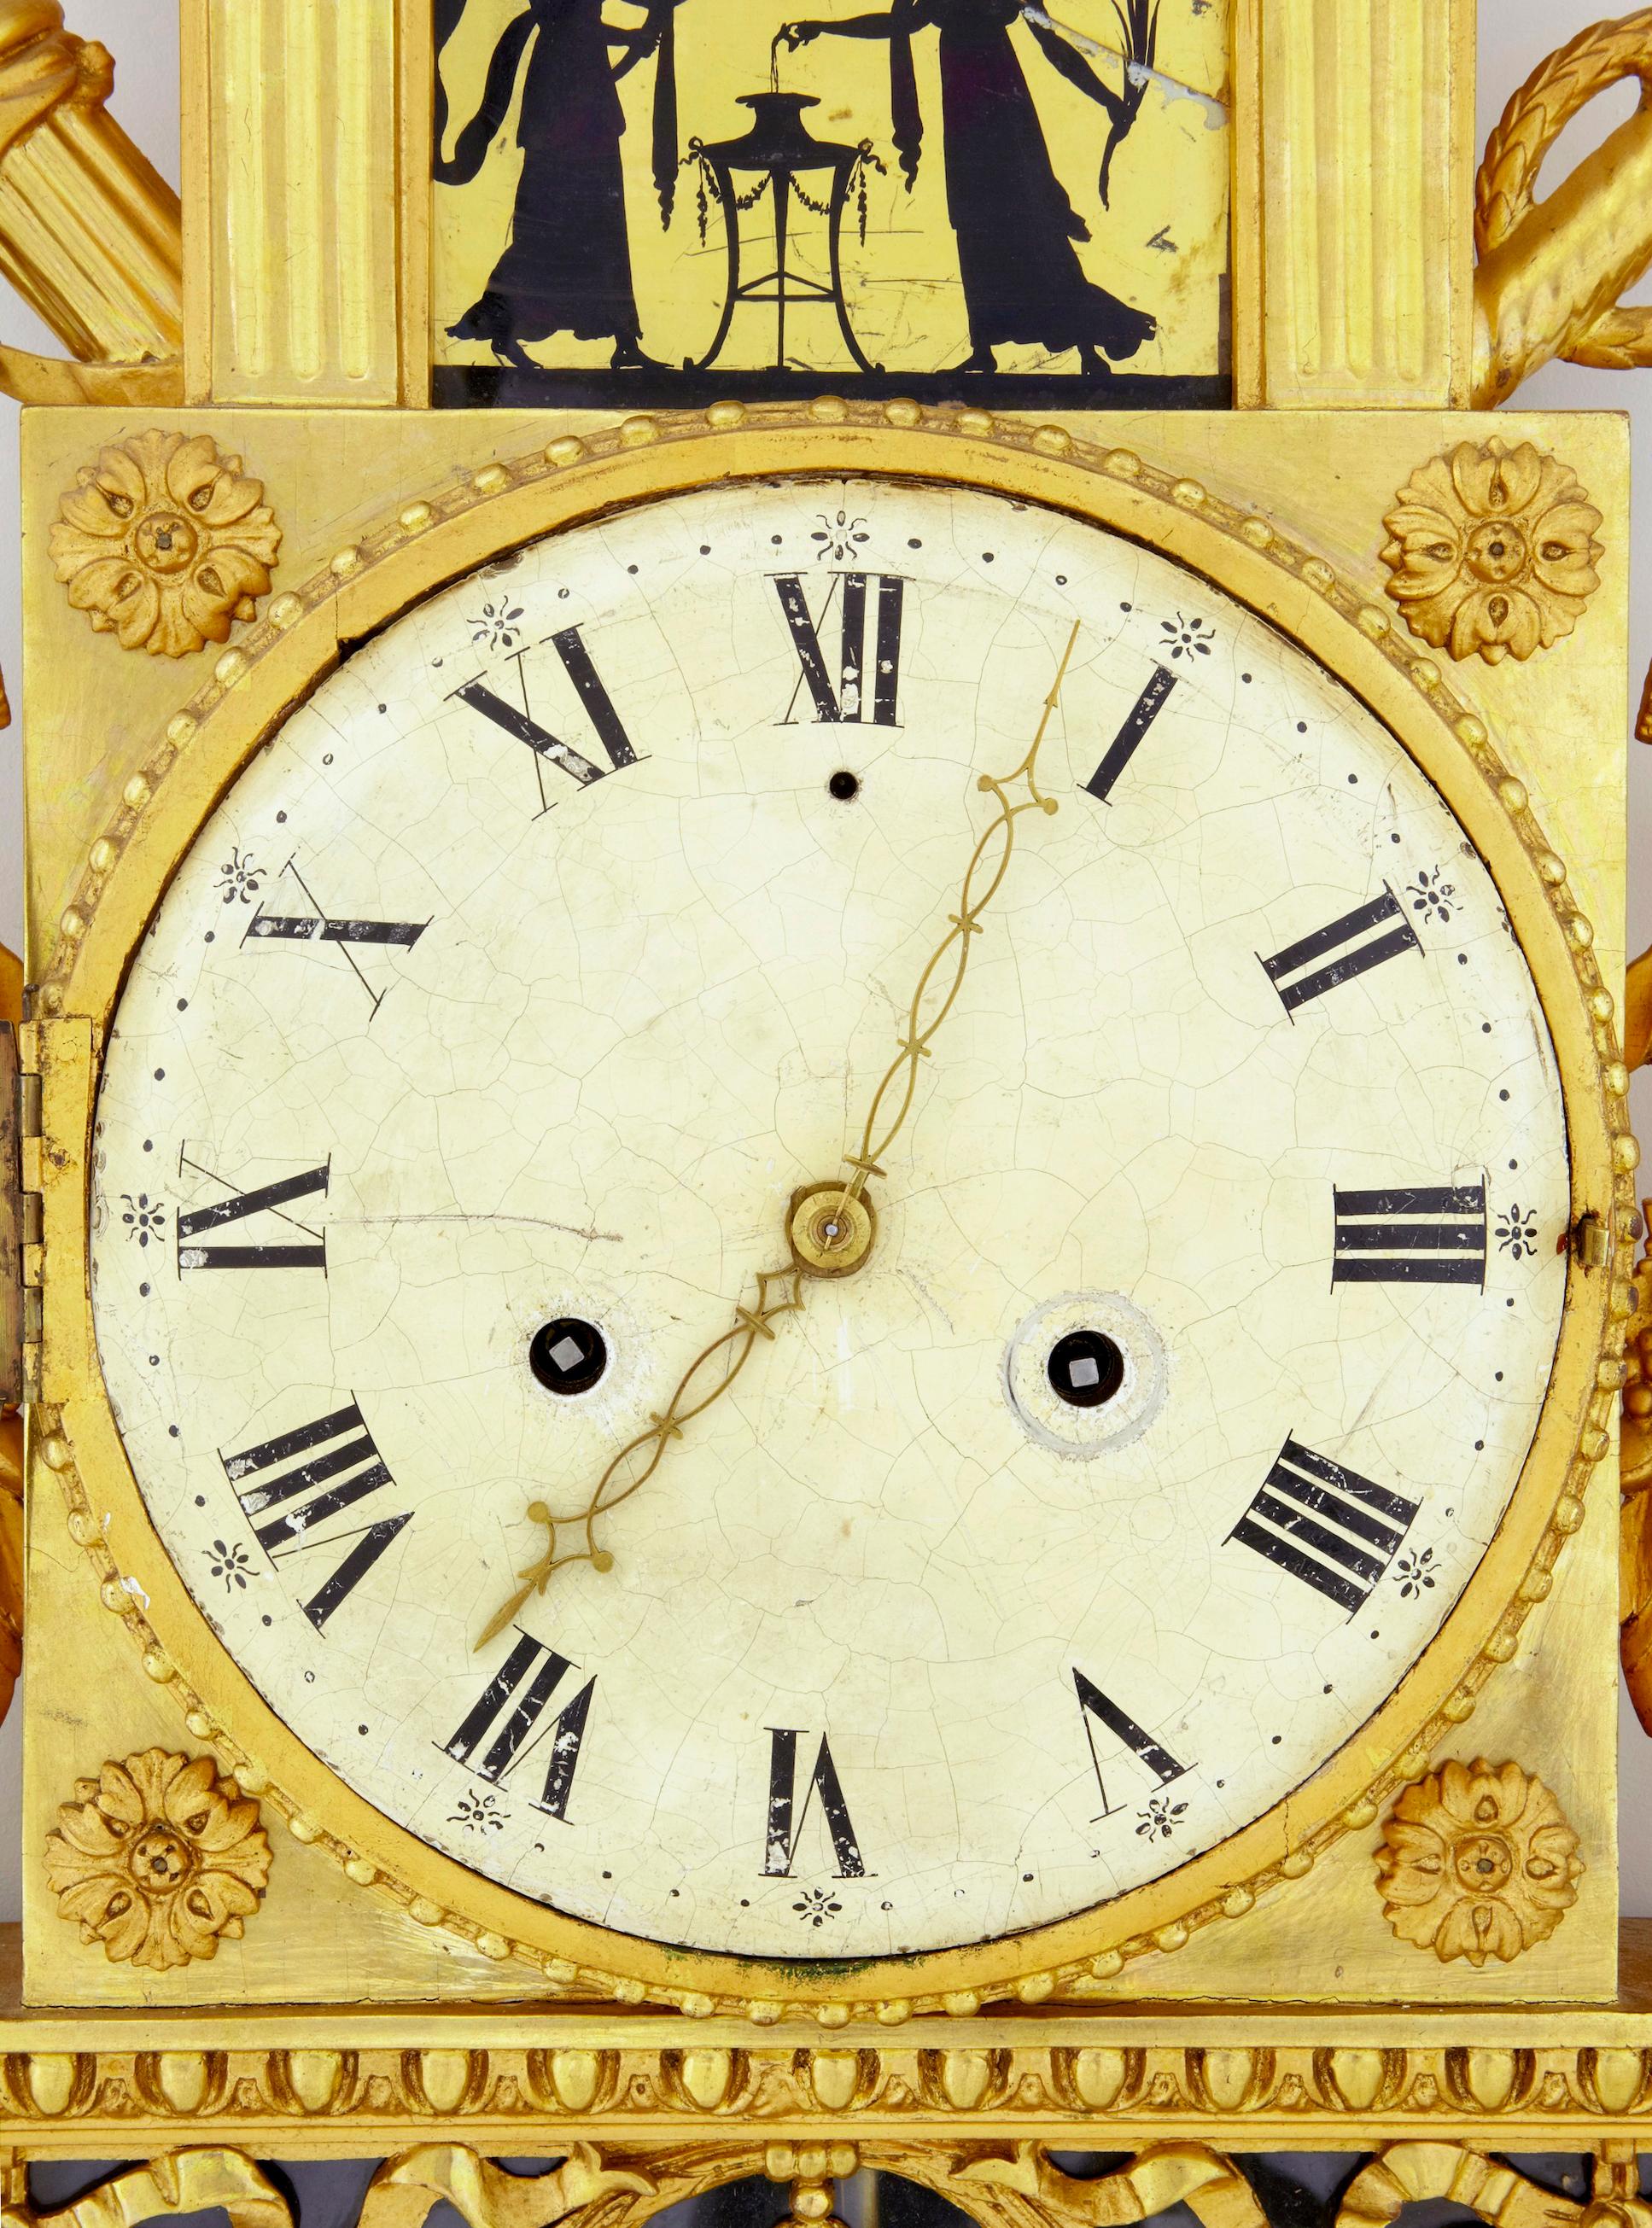 19th century Swedish gilt and églomisé ornate wall clock circa 1840.

Fine quality Swedish wall clock of the empire period circa 1840. Beautifully carved, surmounted with doves. 2 silhouette églomisé glass panels (1 of which has a break). Craquelure